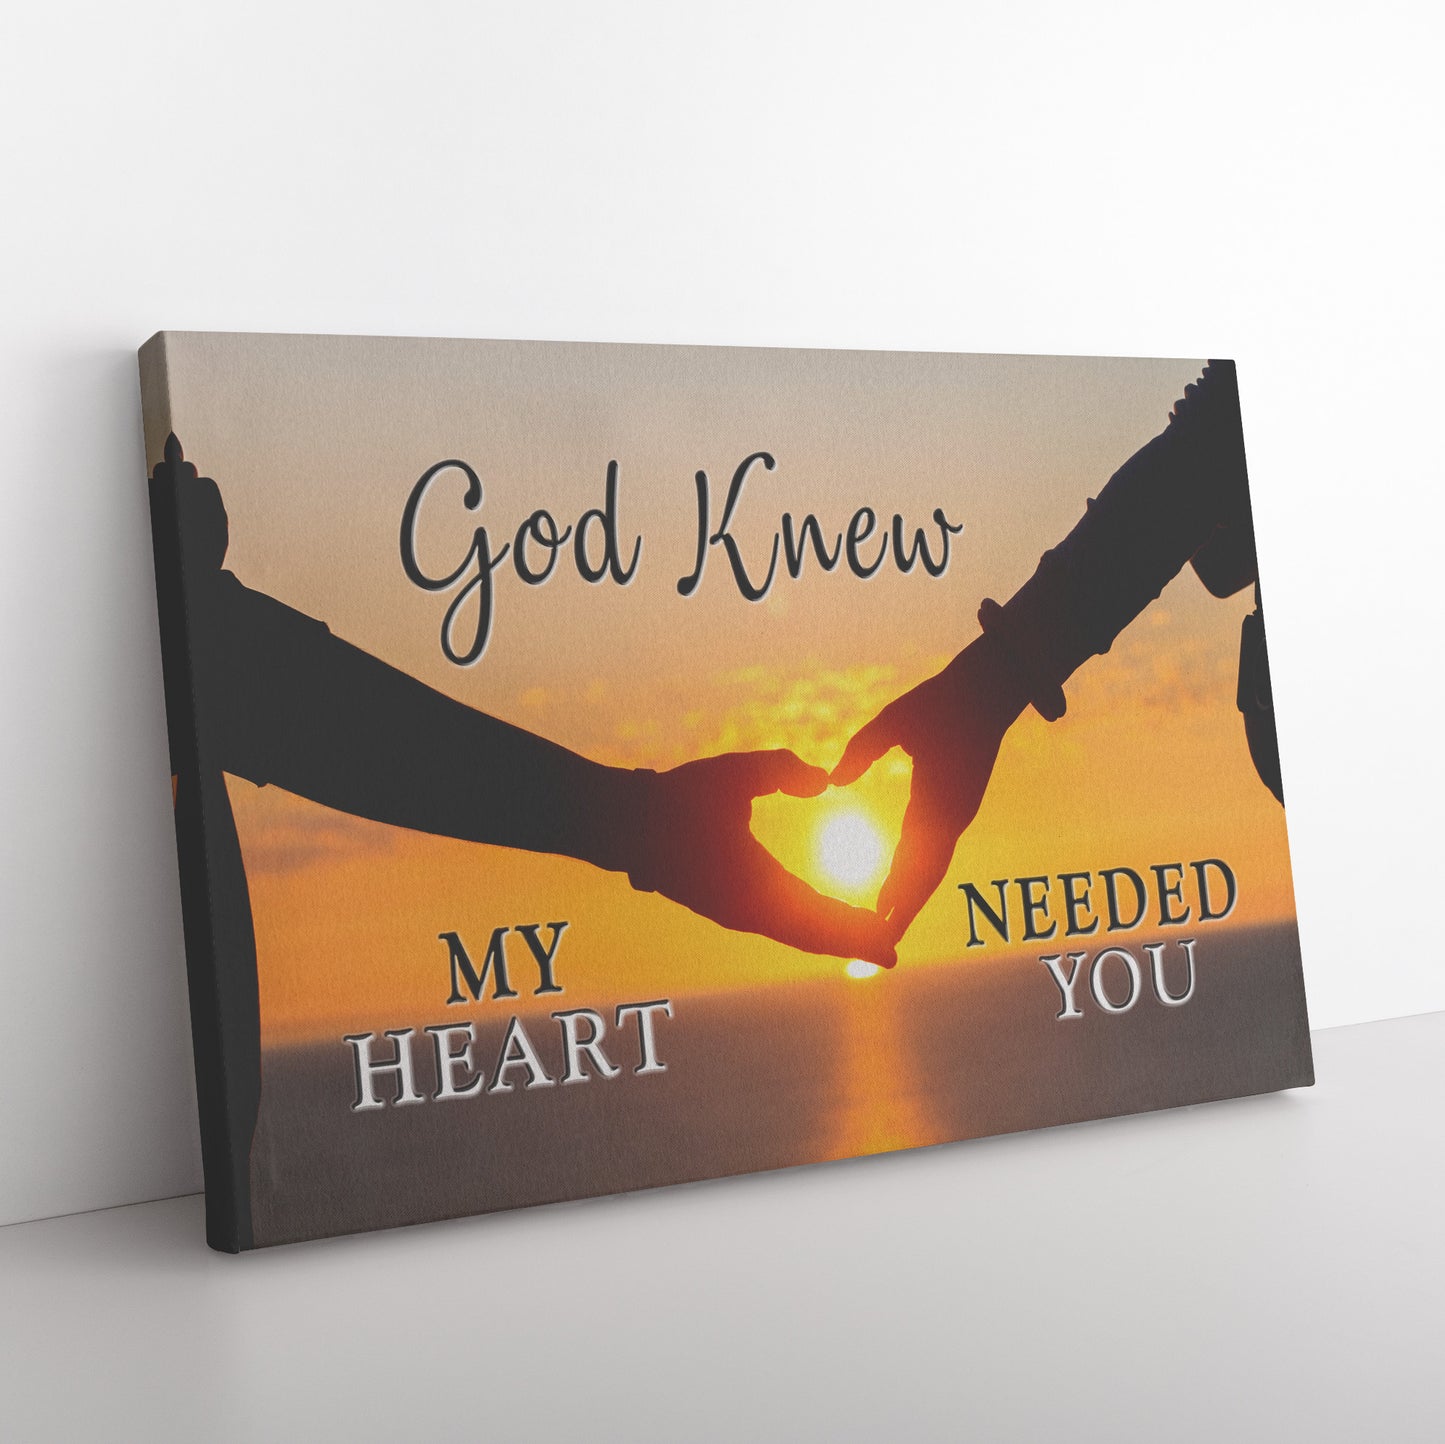 God Knew My Heart Needed You Premium Canvas